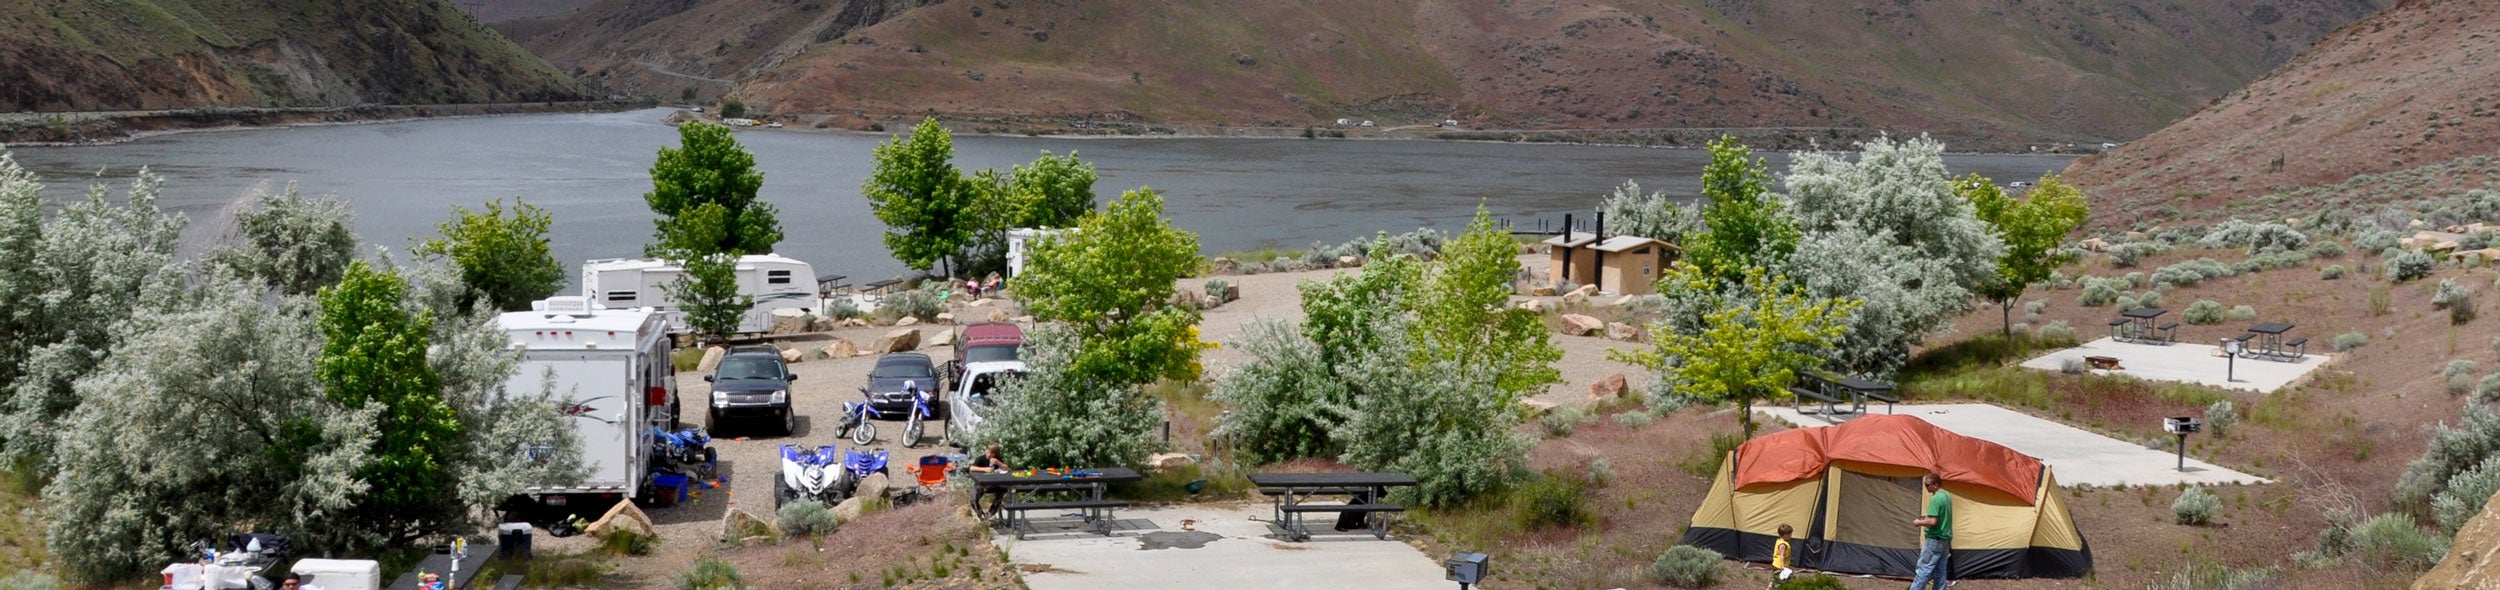 Steck Park Campground - BLM Idaho

Image of tent and trailer campers at Steck Park campground located on Brownlee Reservoir on the Snake River.

Credit: Photo - Larry Ridenhour, BLM